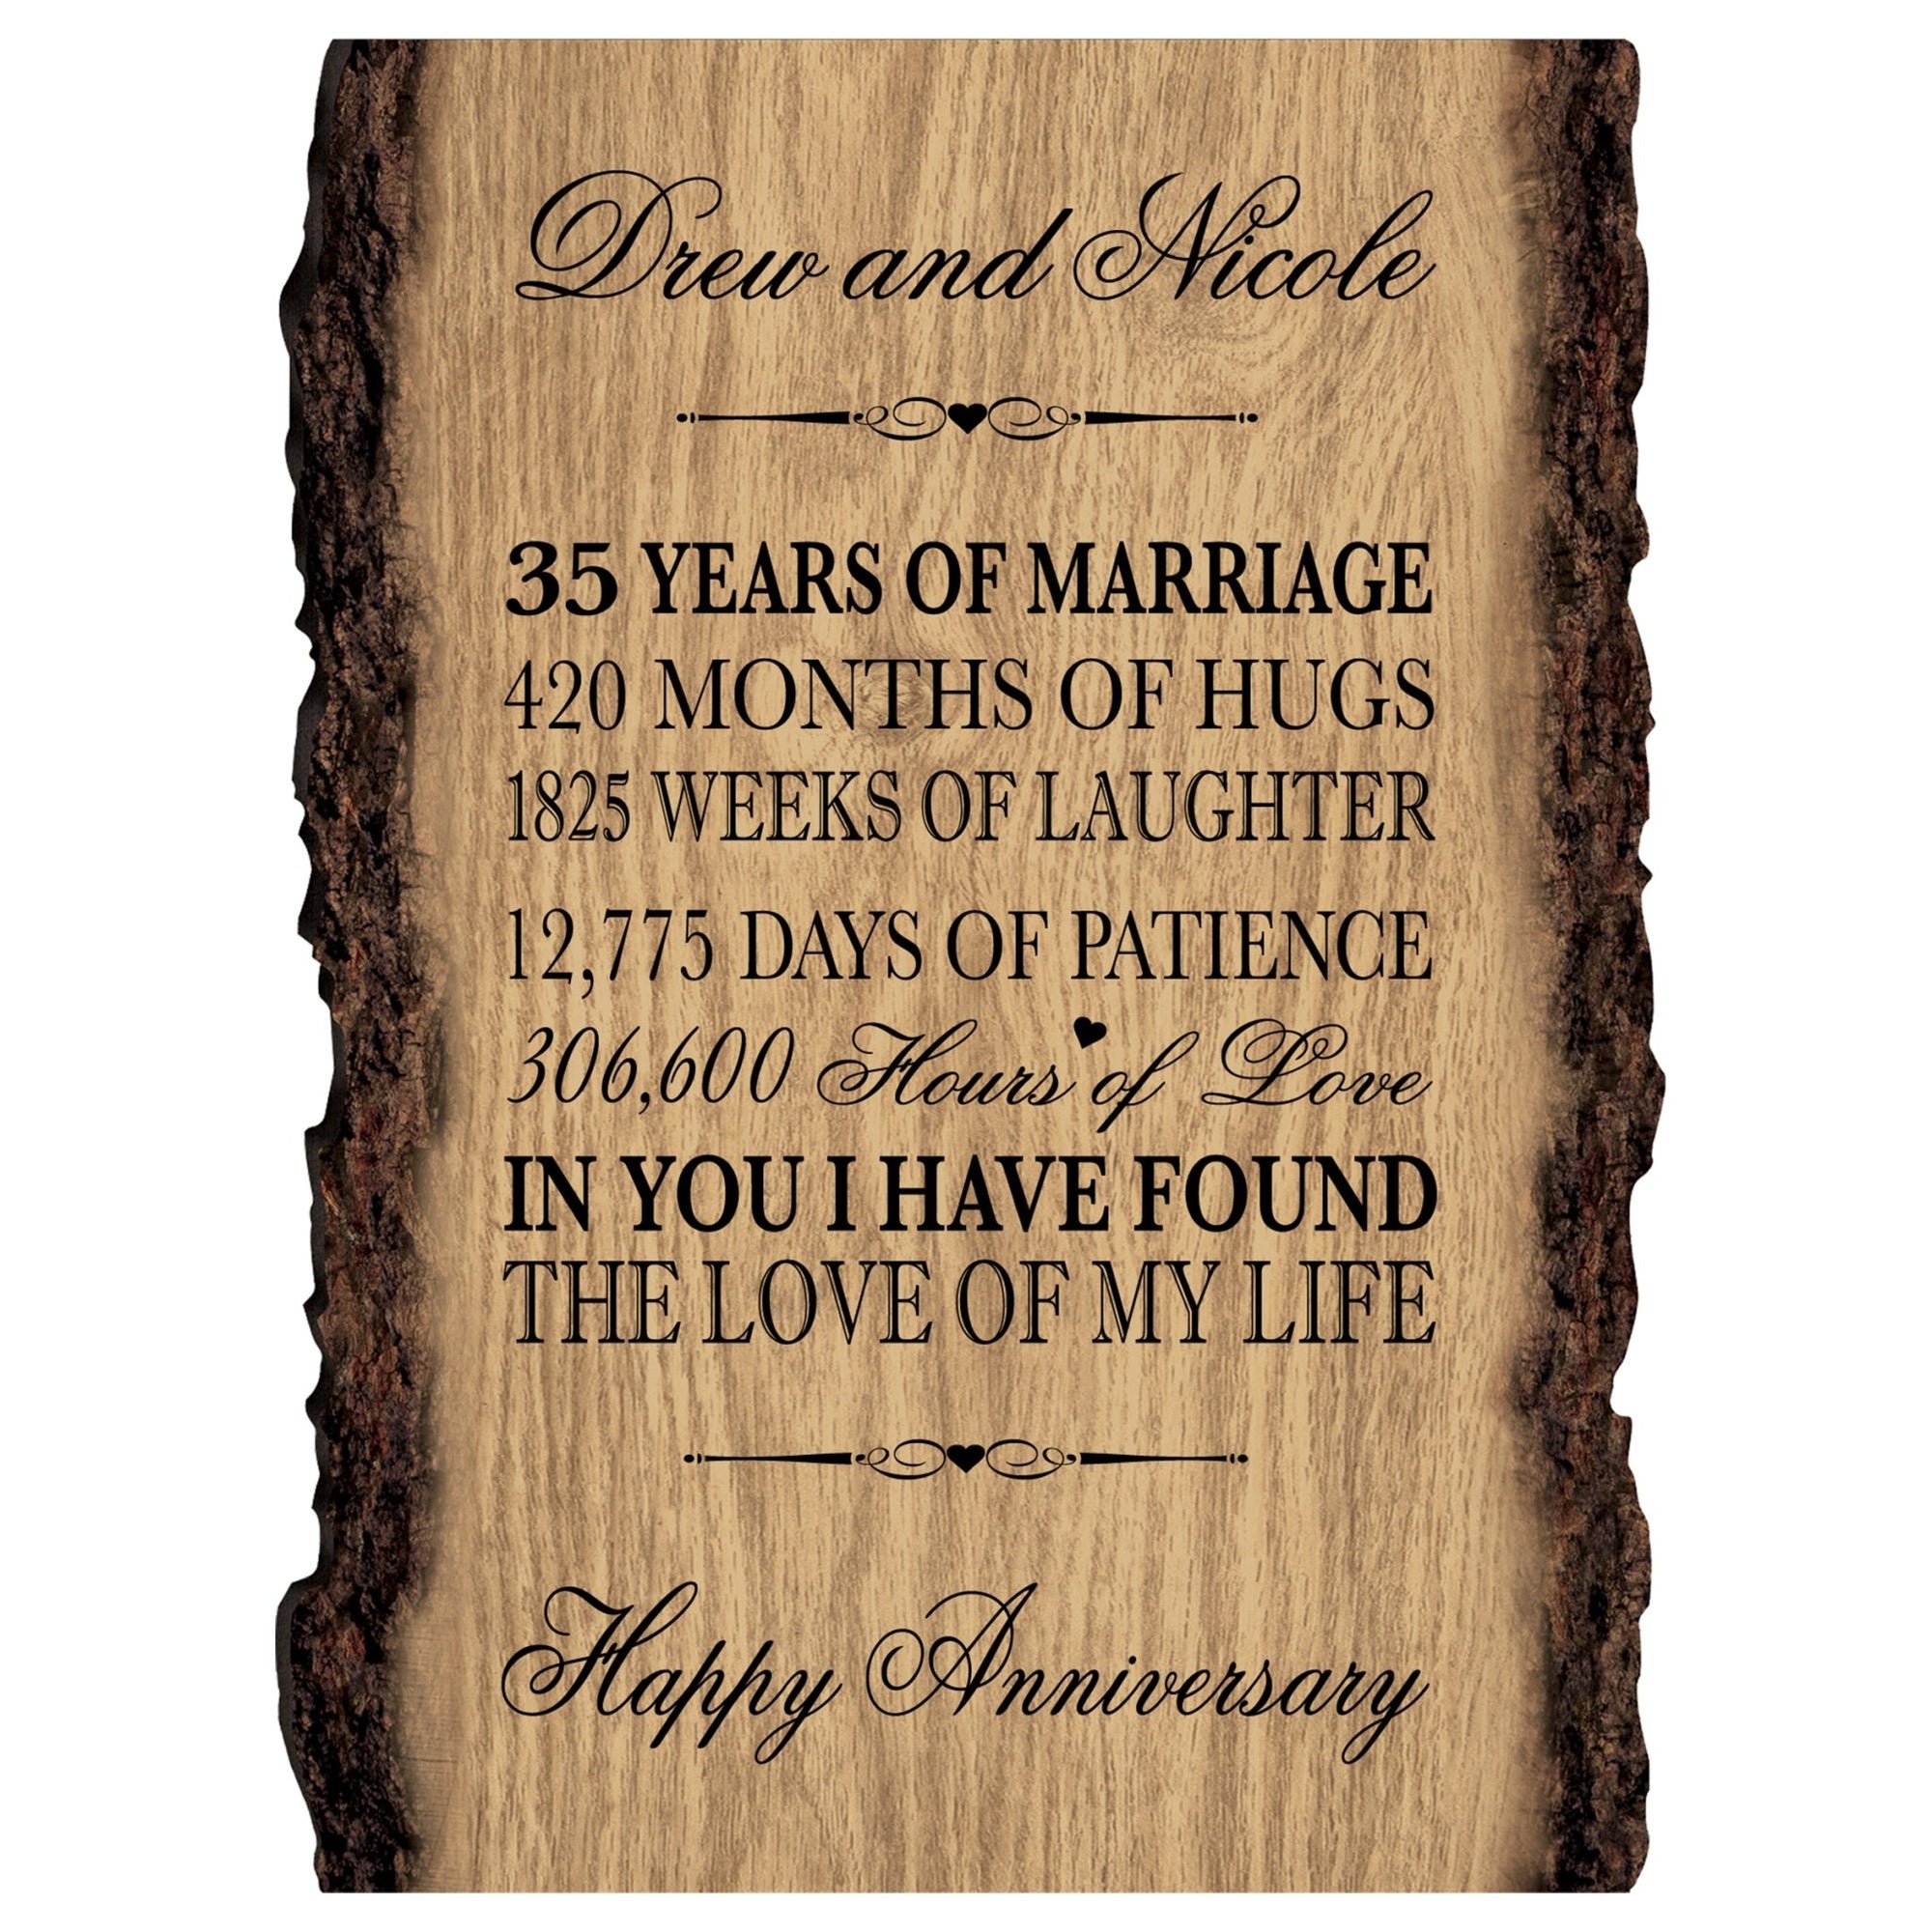 Personalized Wooden Bark Wedding Sign - Our Life Together - LifeSong Milestones